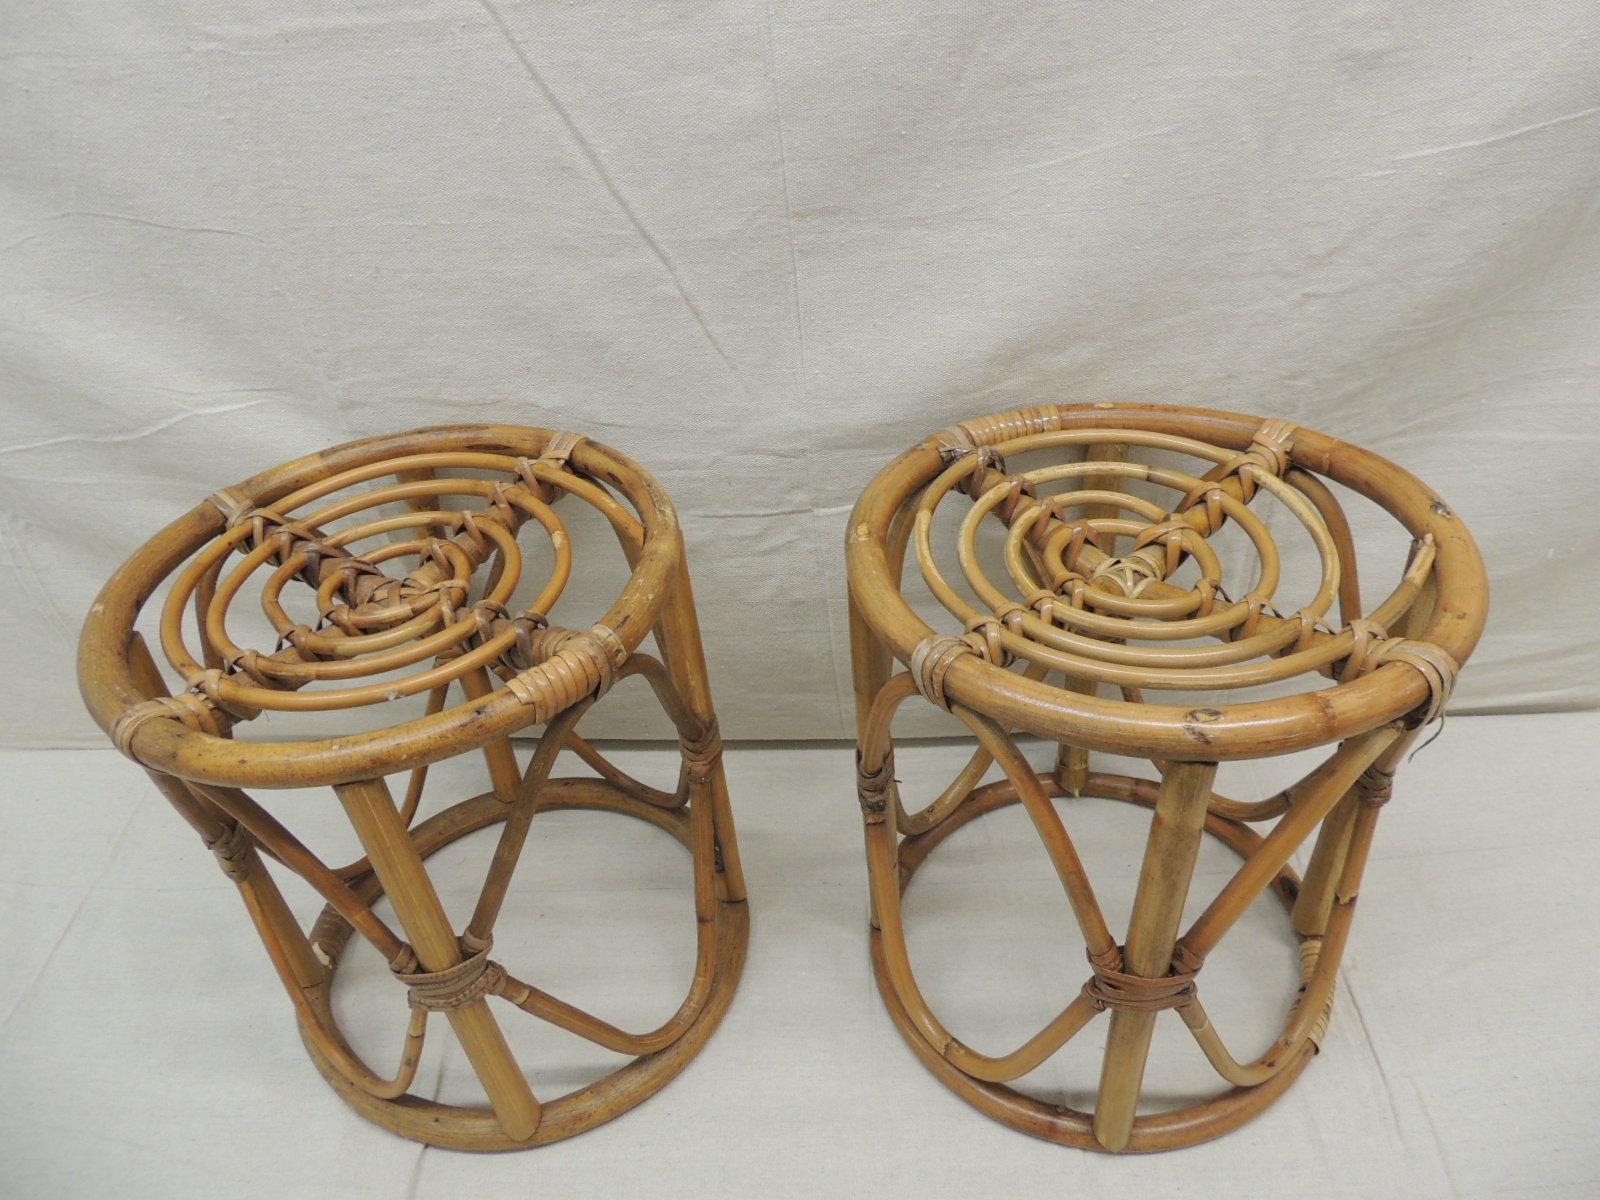 Asian Pair of Vintage Bamboo and Rattan Round Stools or Side Tables